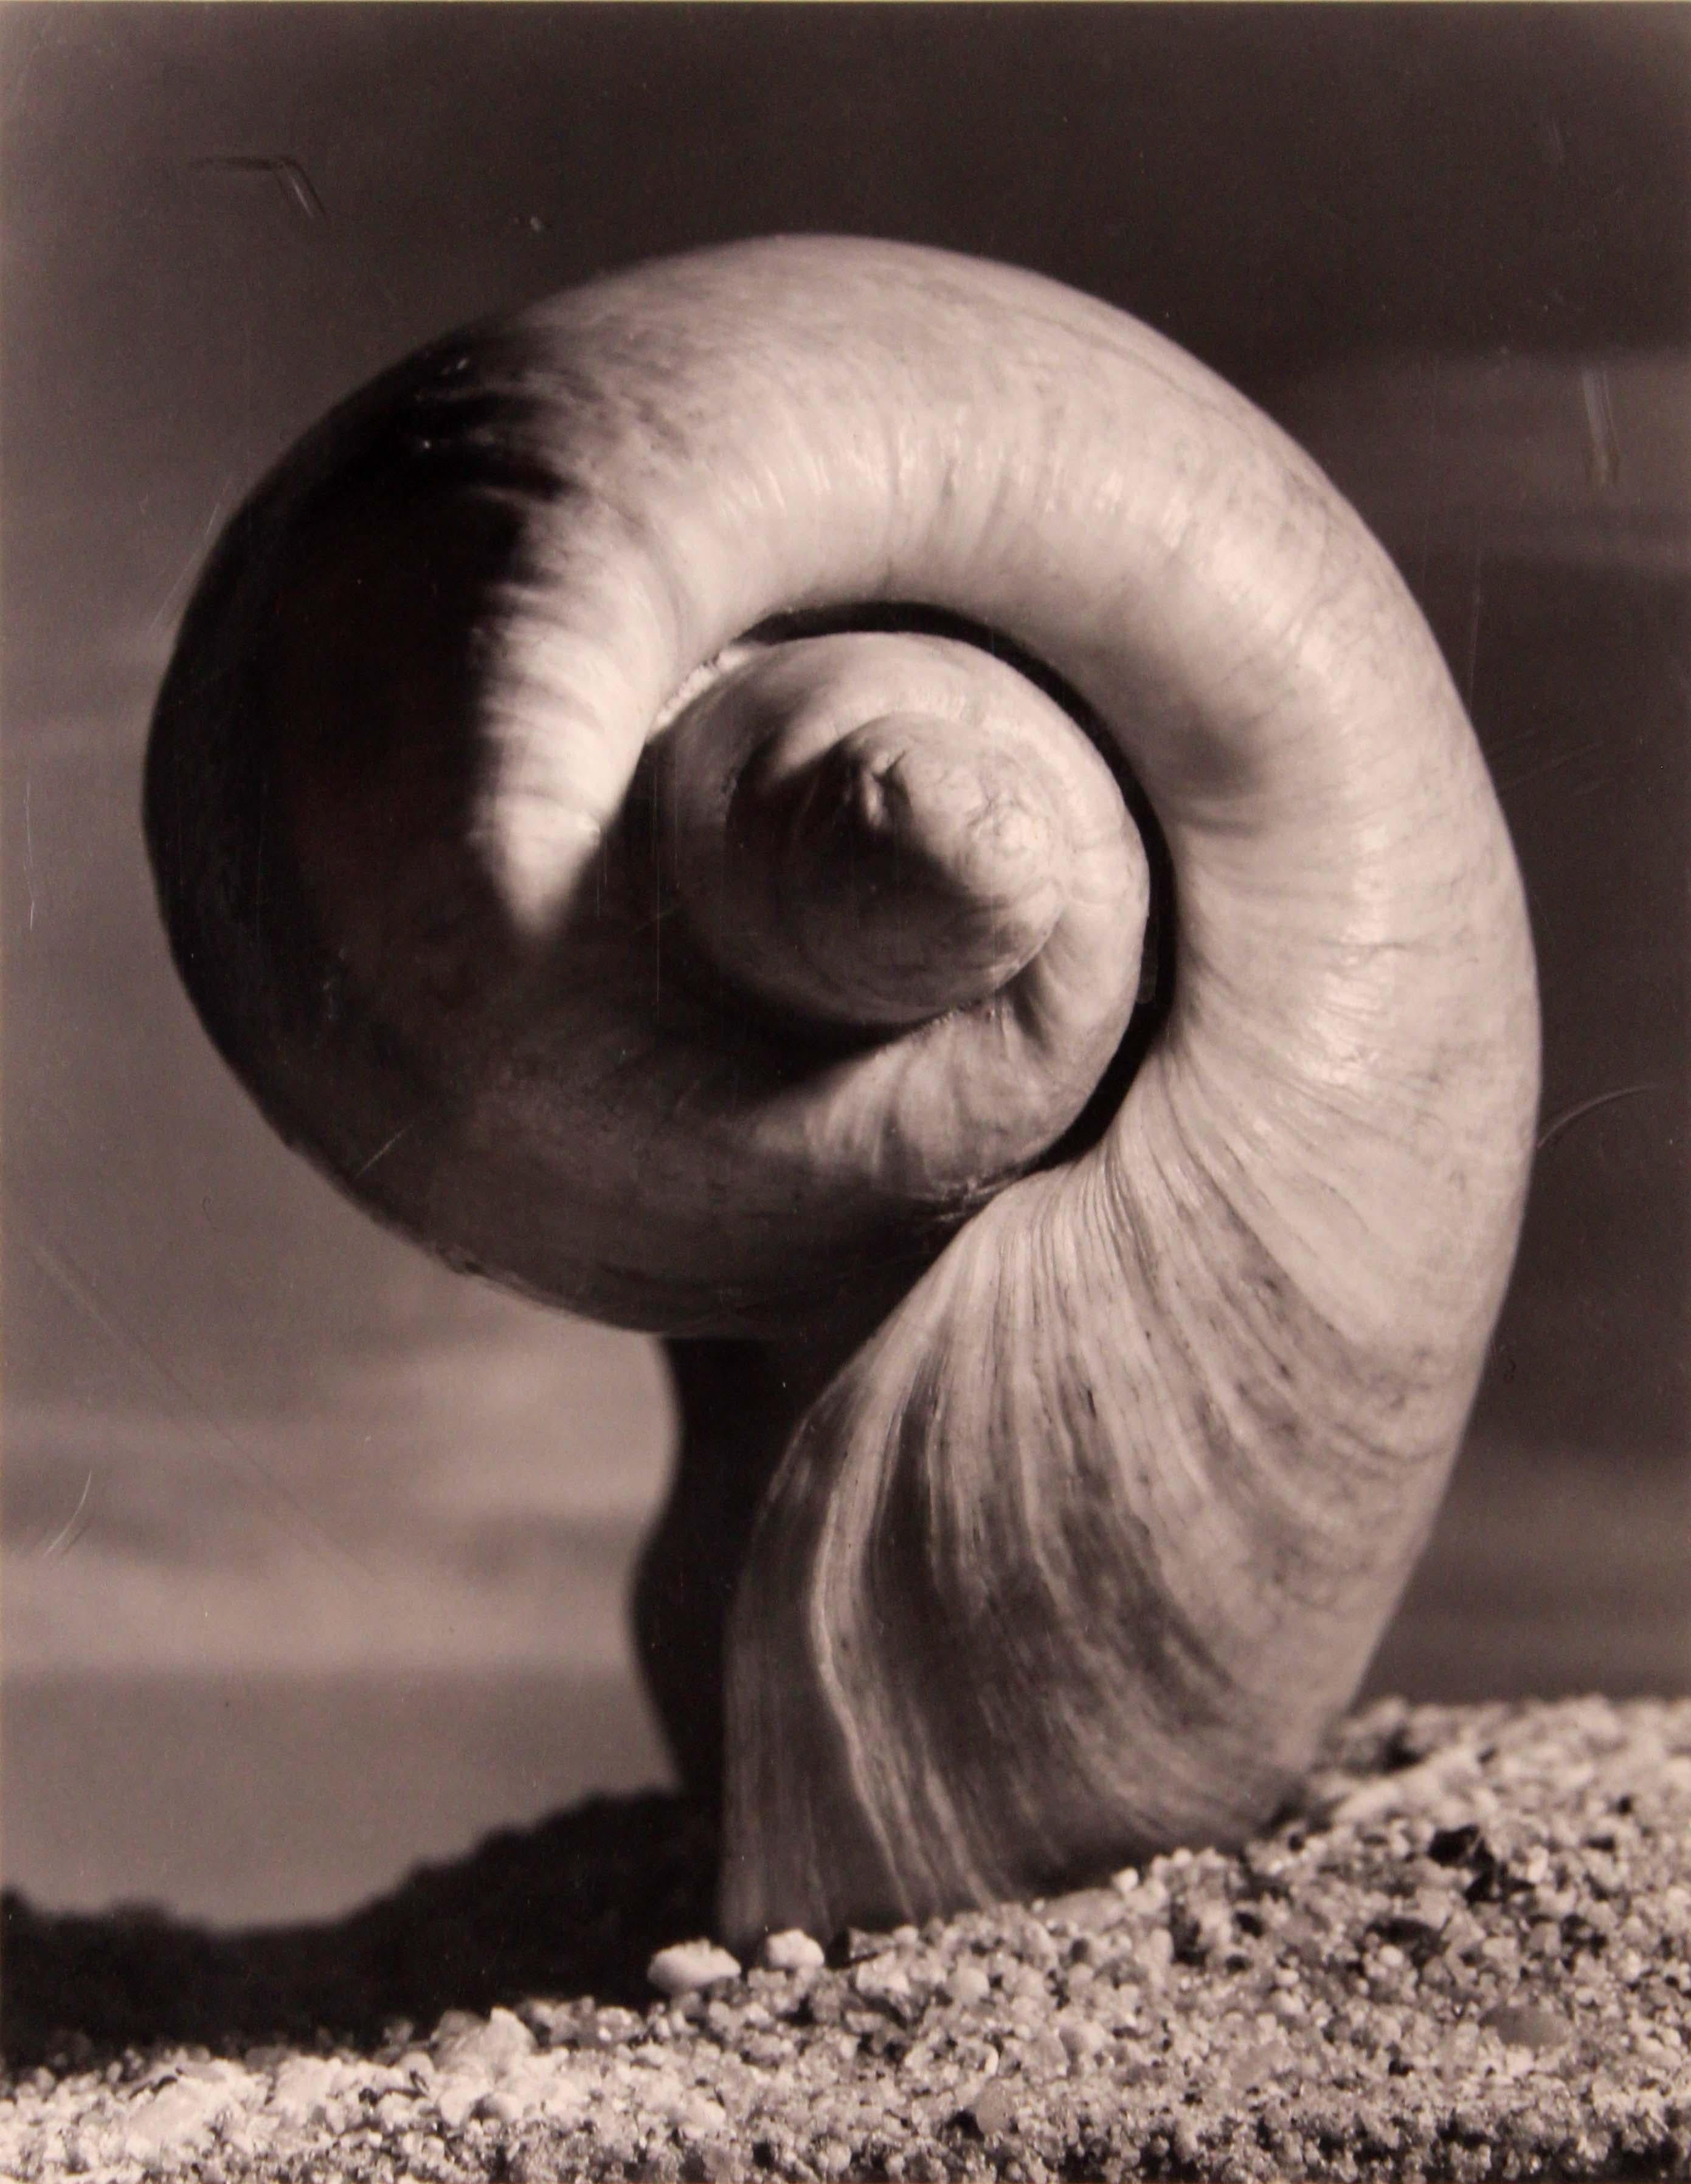 A dramatic gelatin silver print titled “Olla Volute” by Andreas Feininger. Circa 1950. Hand signed in pencil on the bottom right with an annotation of 2/10 on the bottom left. From the artist’s “Portfolio of Shells” series. An extraordinary example